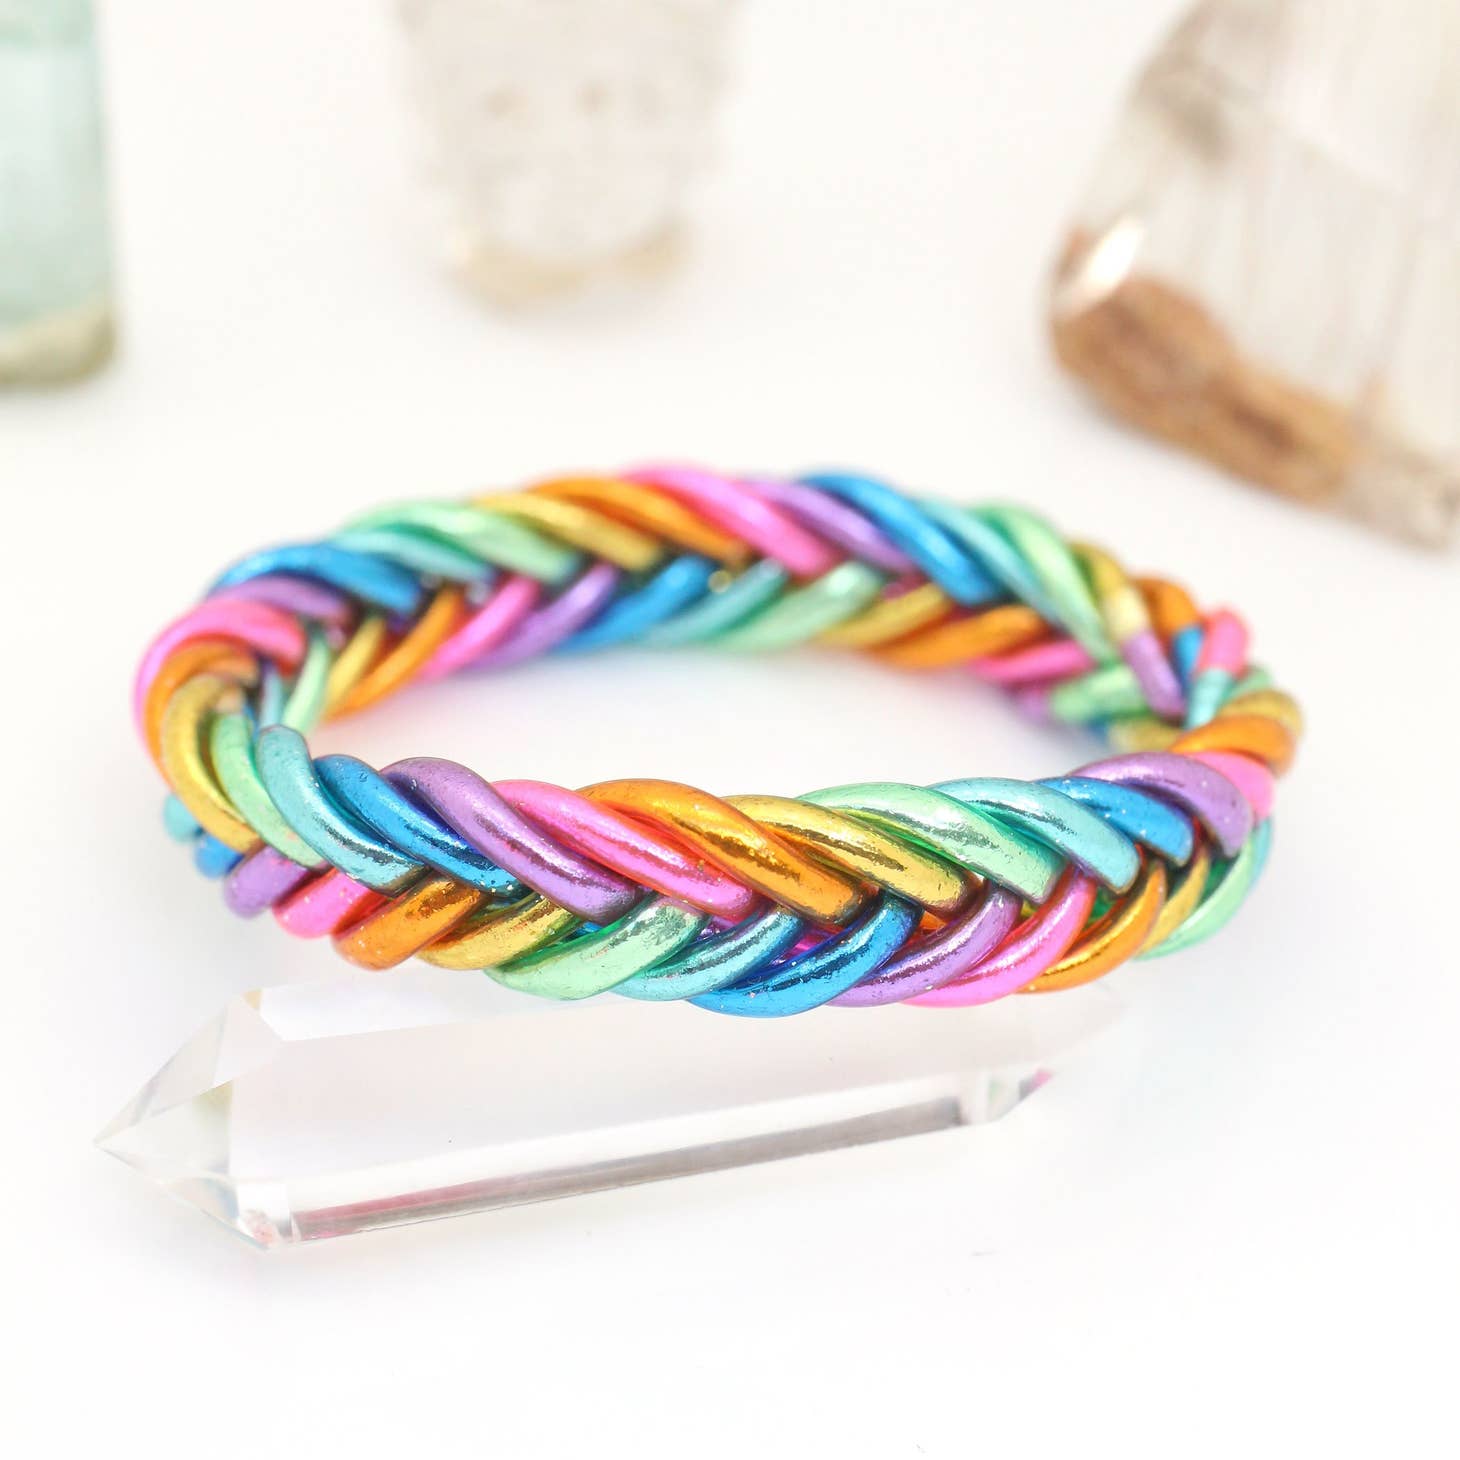 Adjustable Magnetic Distance String Bracelets With Lucky Rope, Elastic  Rubber Band, Braided Heart Charms Perfect Gift For Couples And Lovers From  Xiteng04, $0.94 | DHgate.Com